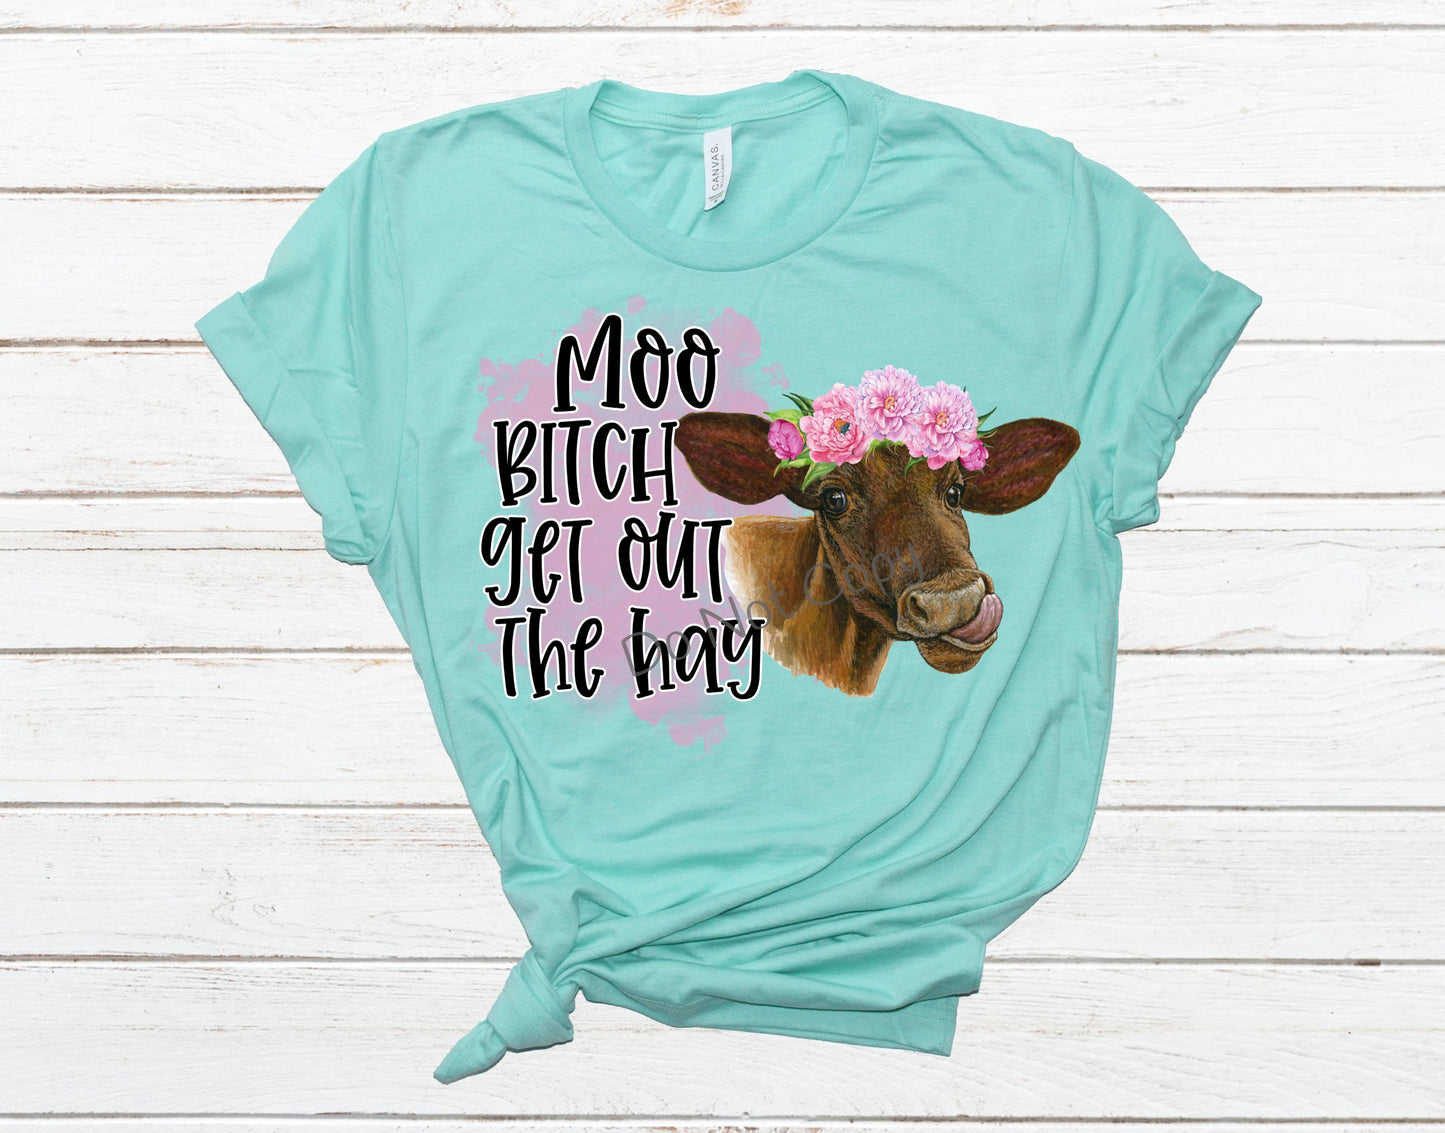 Moo bitch get out the hay -DTF